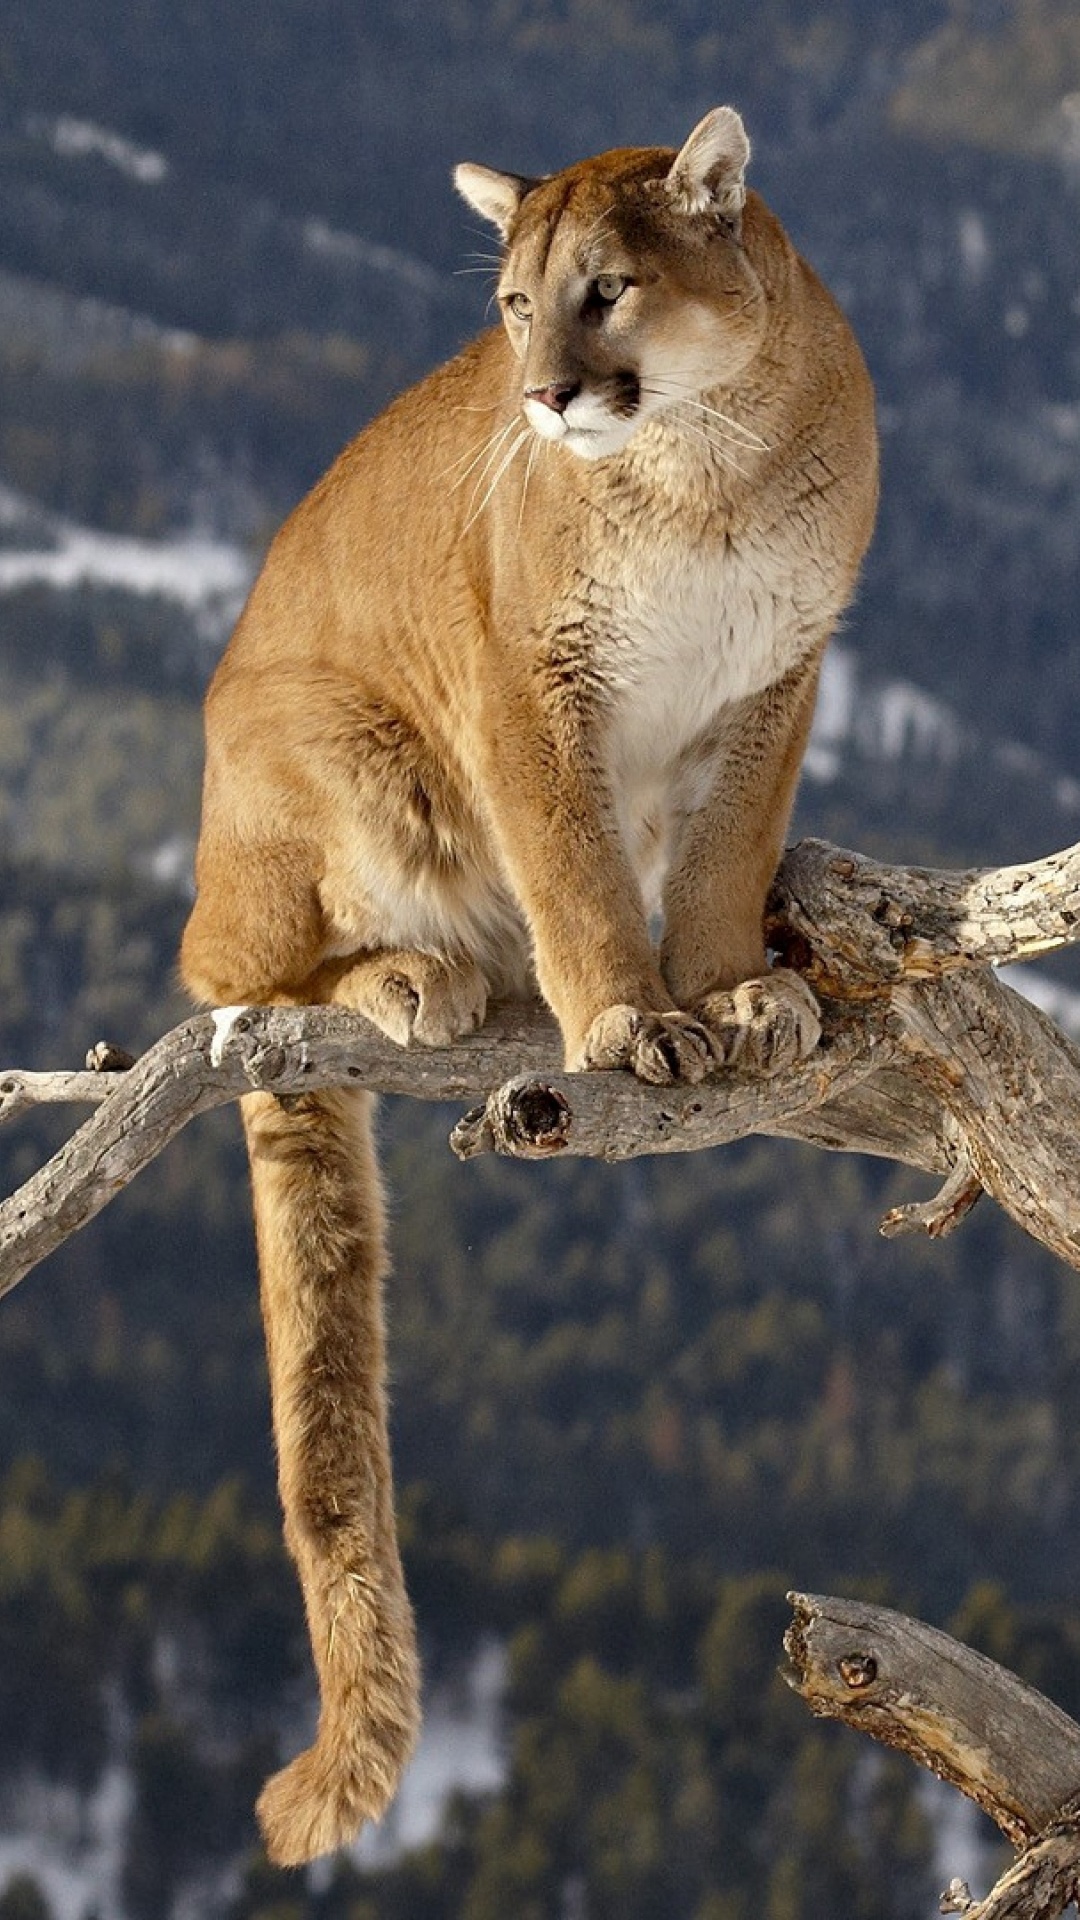 Brown and White Short Coated Cat on Brown Tree Branch During Daytime. Wallpaper in 1080x1920 Resolution